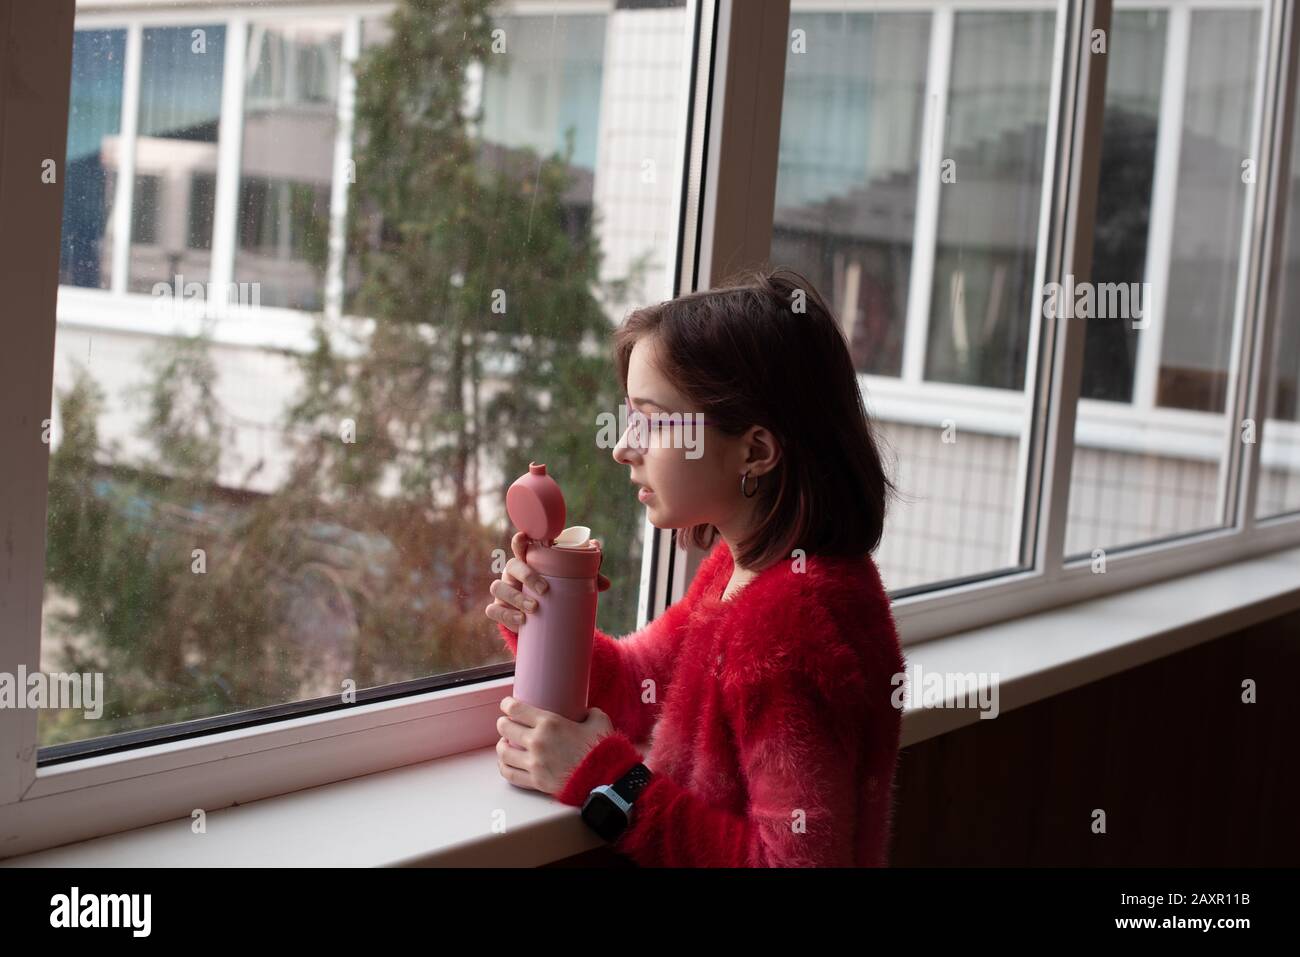 girl with cup. schoolgirl girl in glasses drinks water from a thermomug.A schoolgirl drinks tea, juice or water from a thermal cup or thermos. girl at Stock Photo